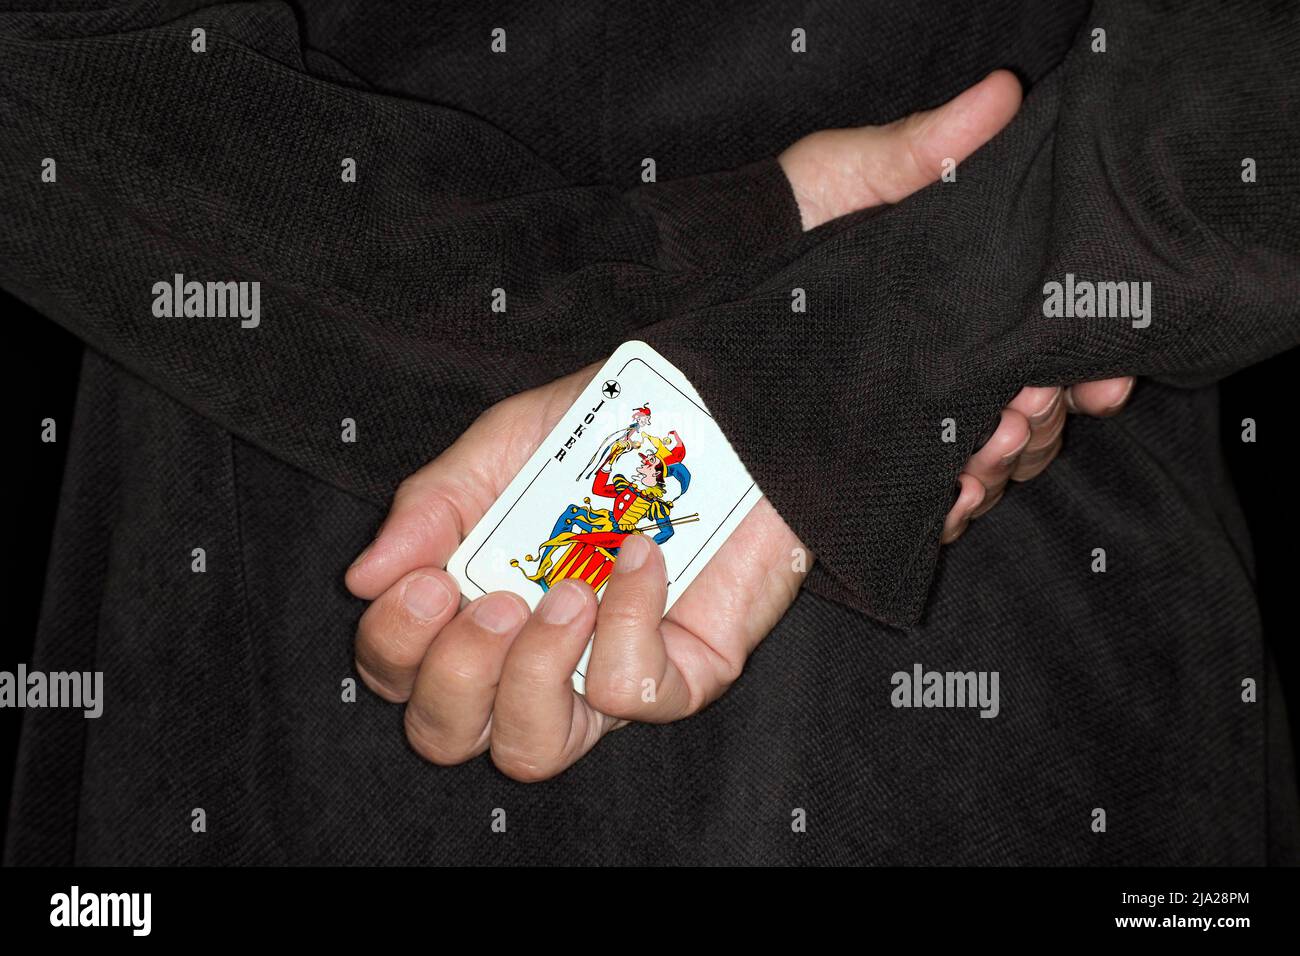 Playing card, cheating, symbol cheating, symbol image for another joker up your sleeve Stock Photo